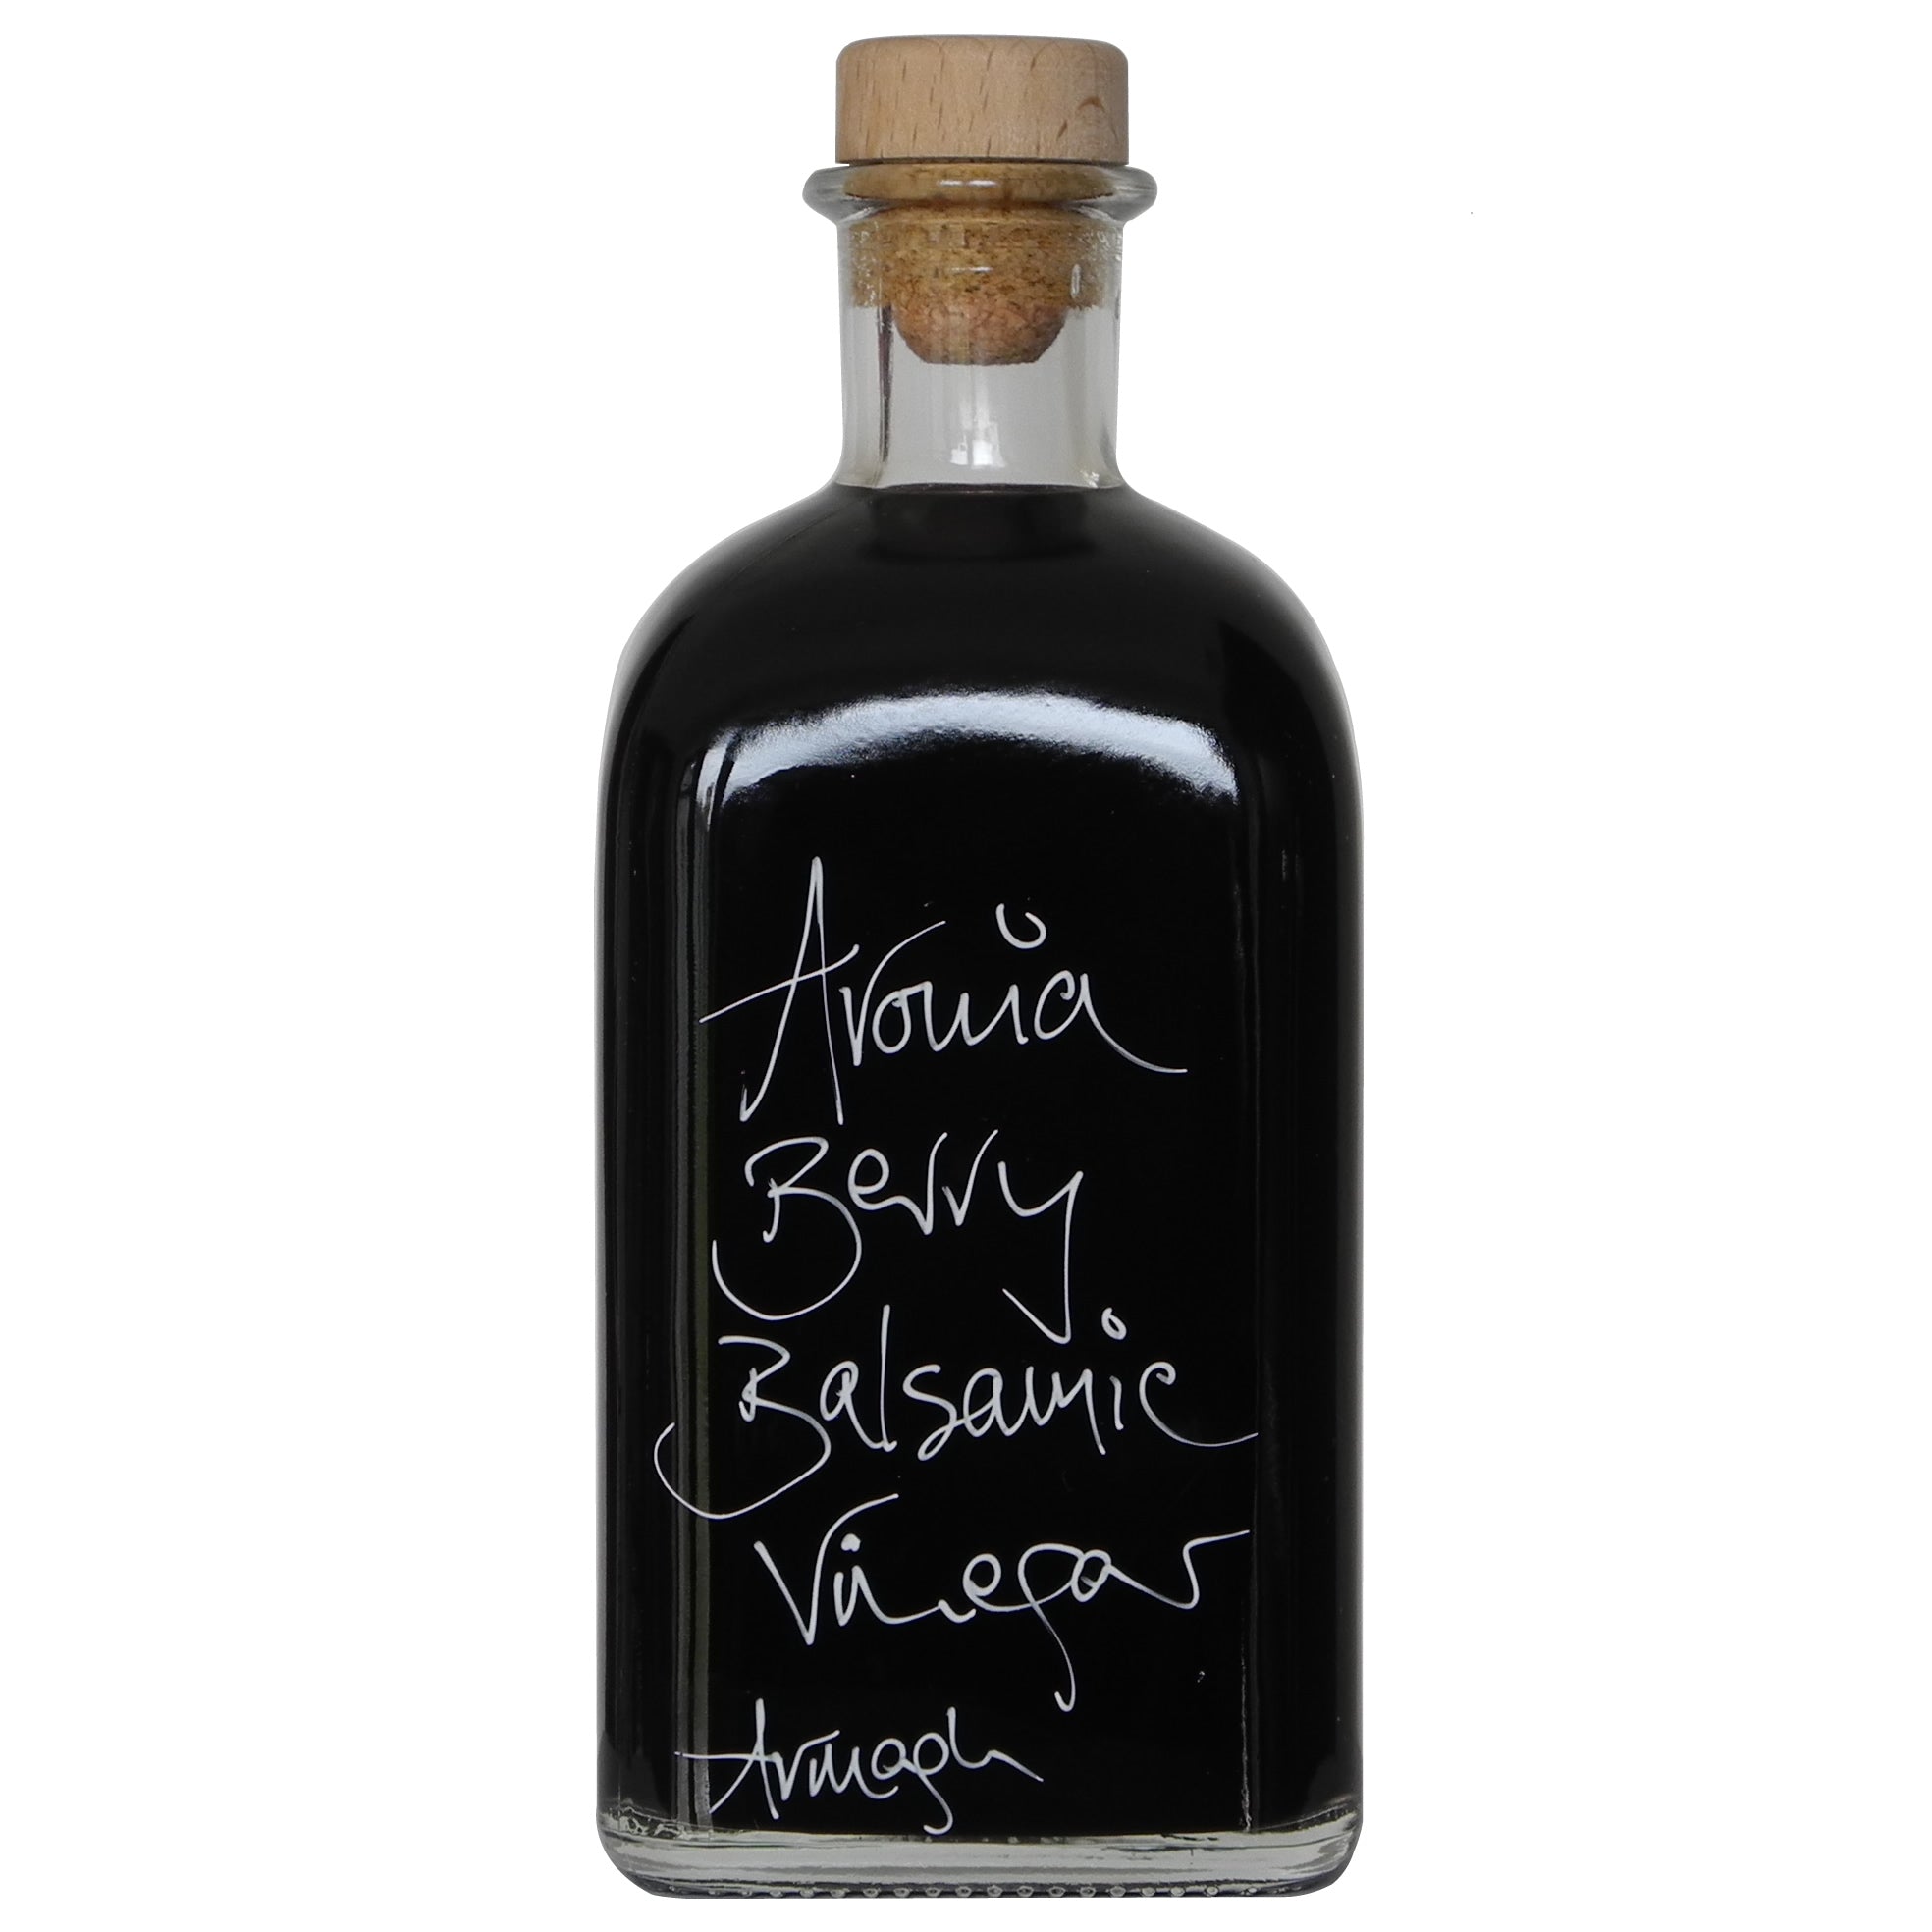 Aronia Berry Balsamic Vinegar from Armagh